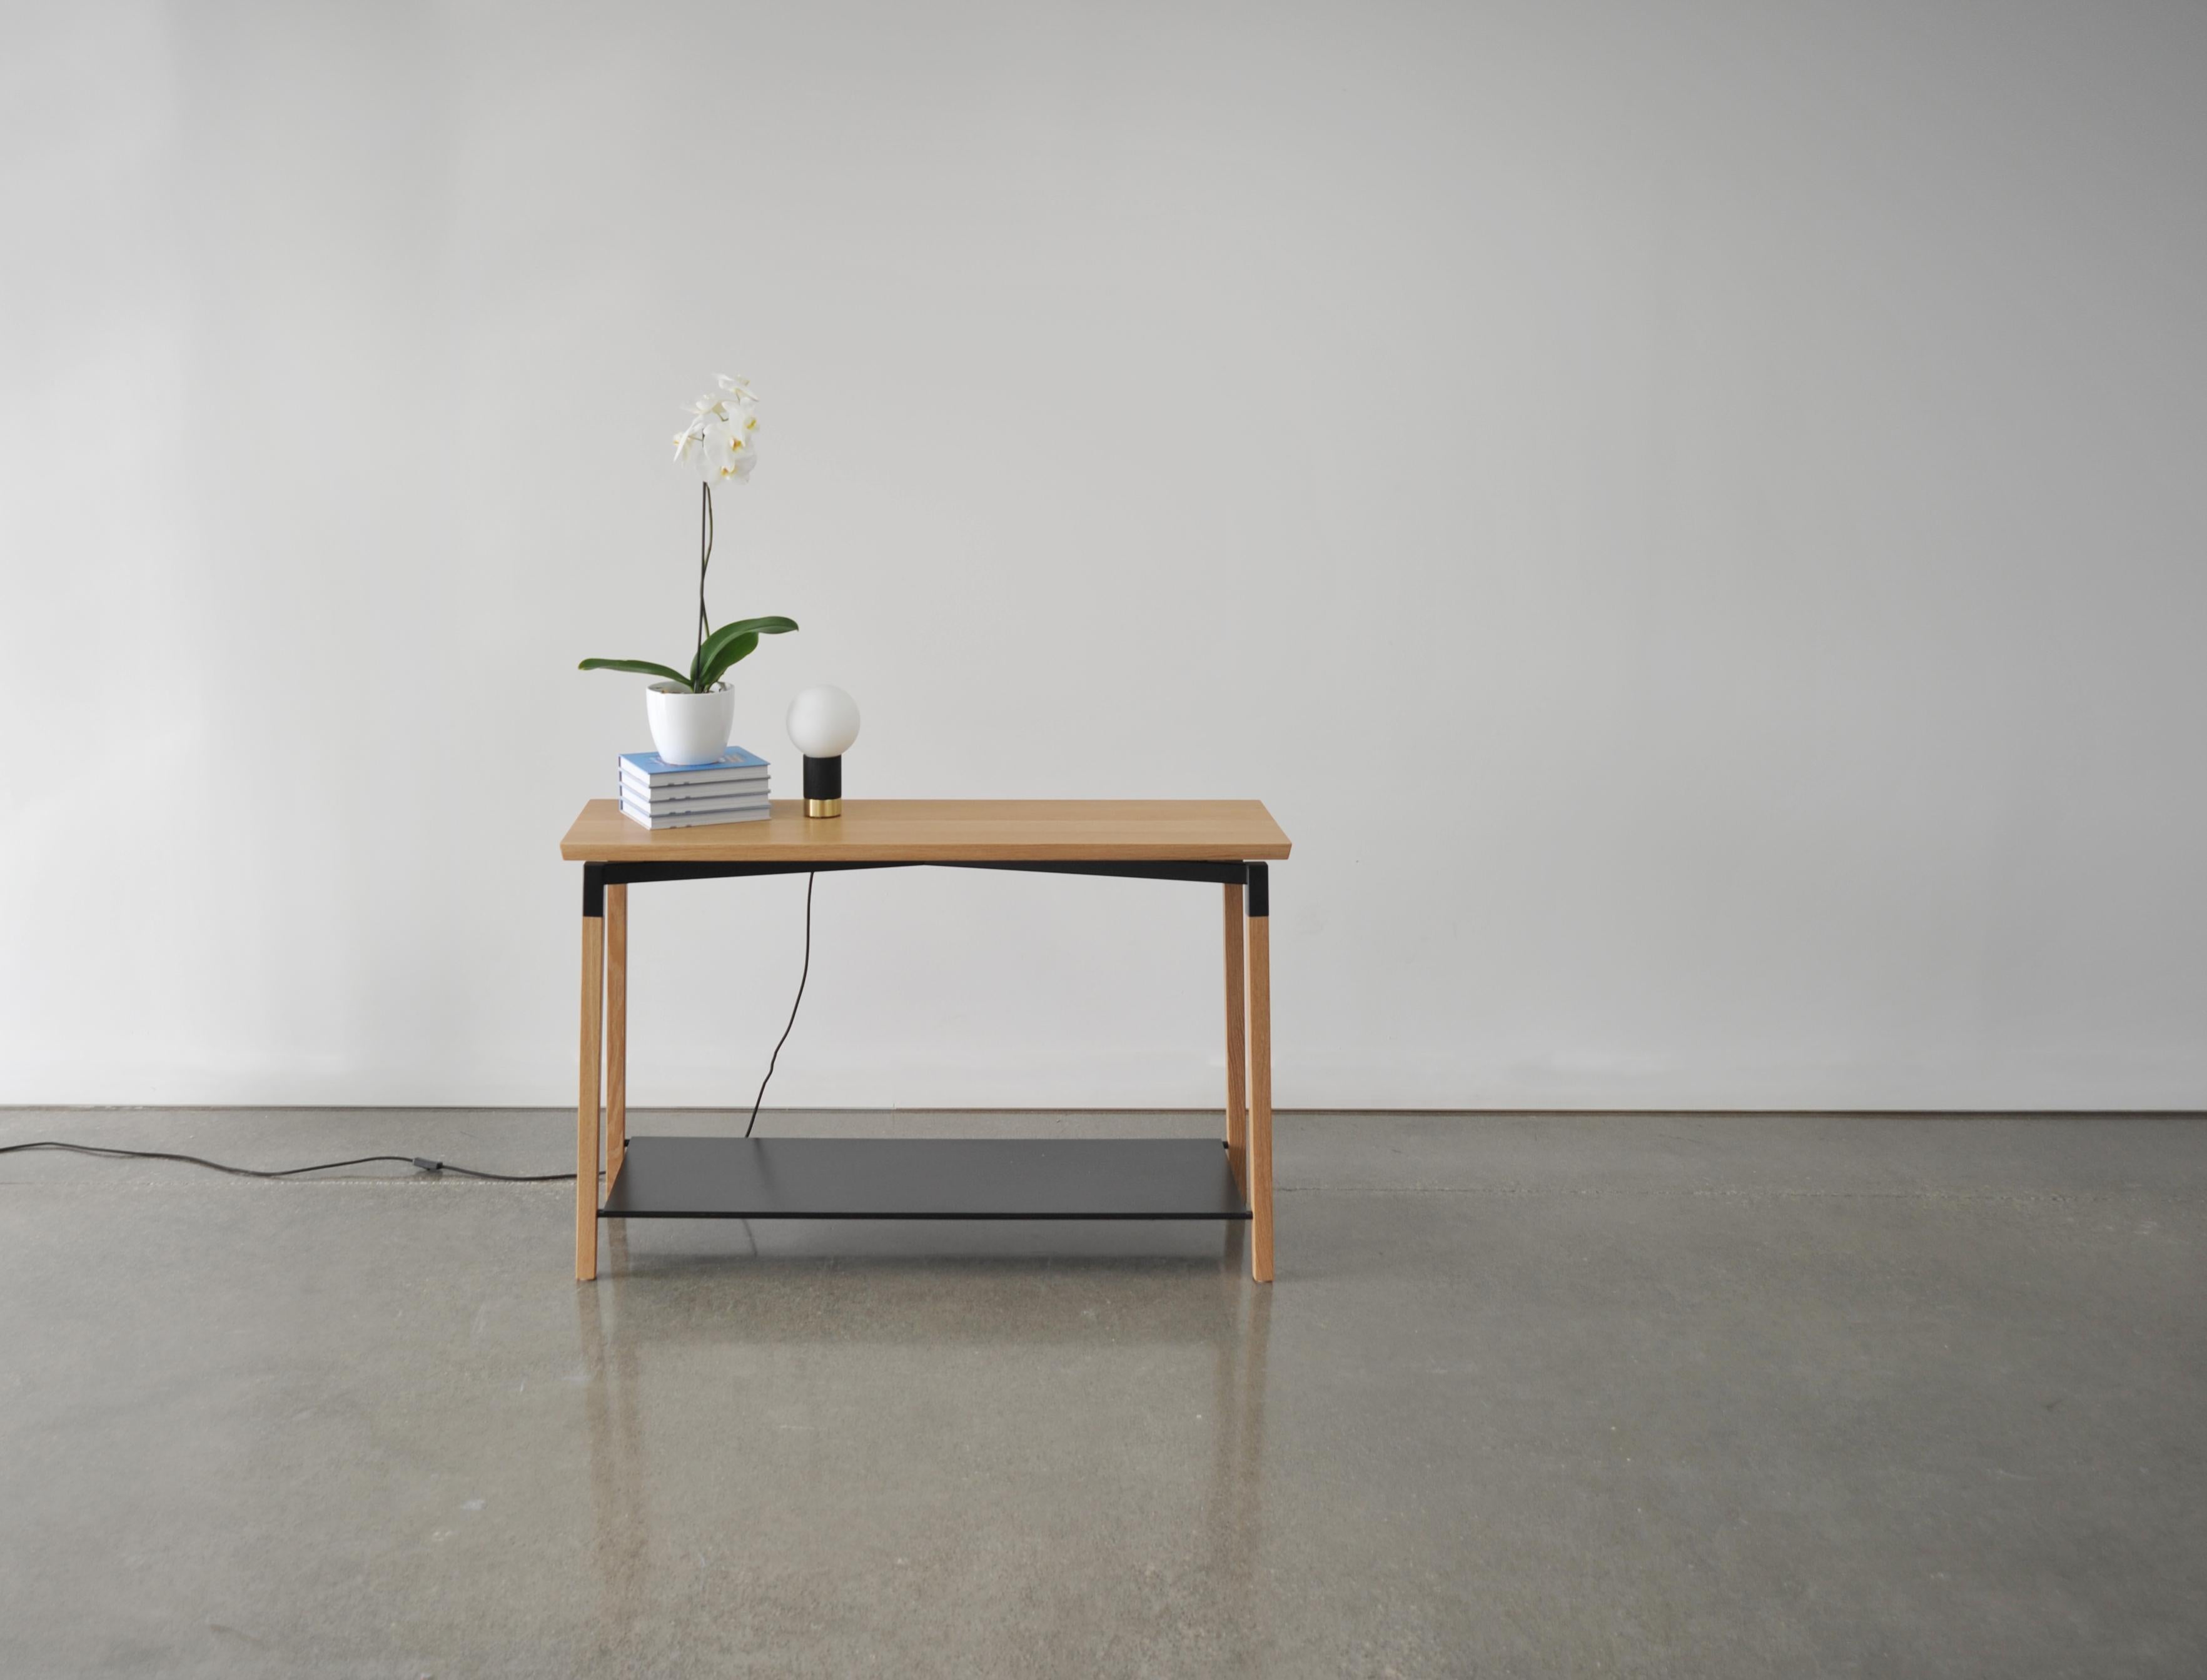 Canadian Metal Plated Oak Parkdale Console by Hollis & Morris